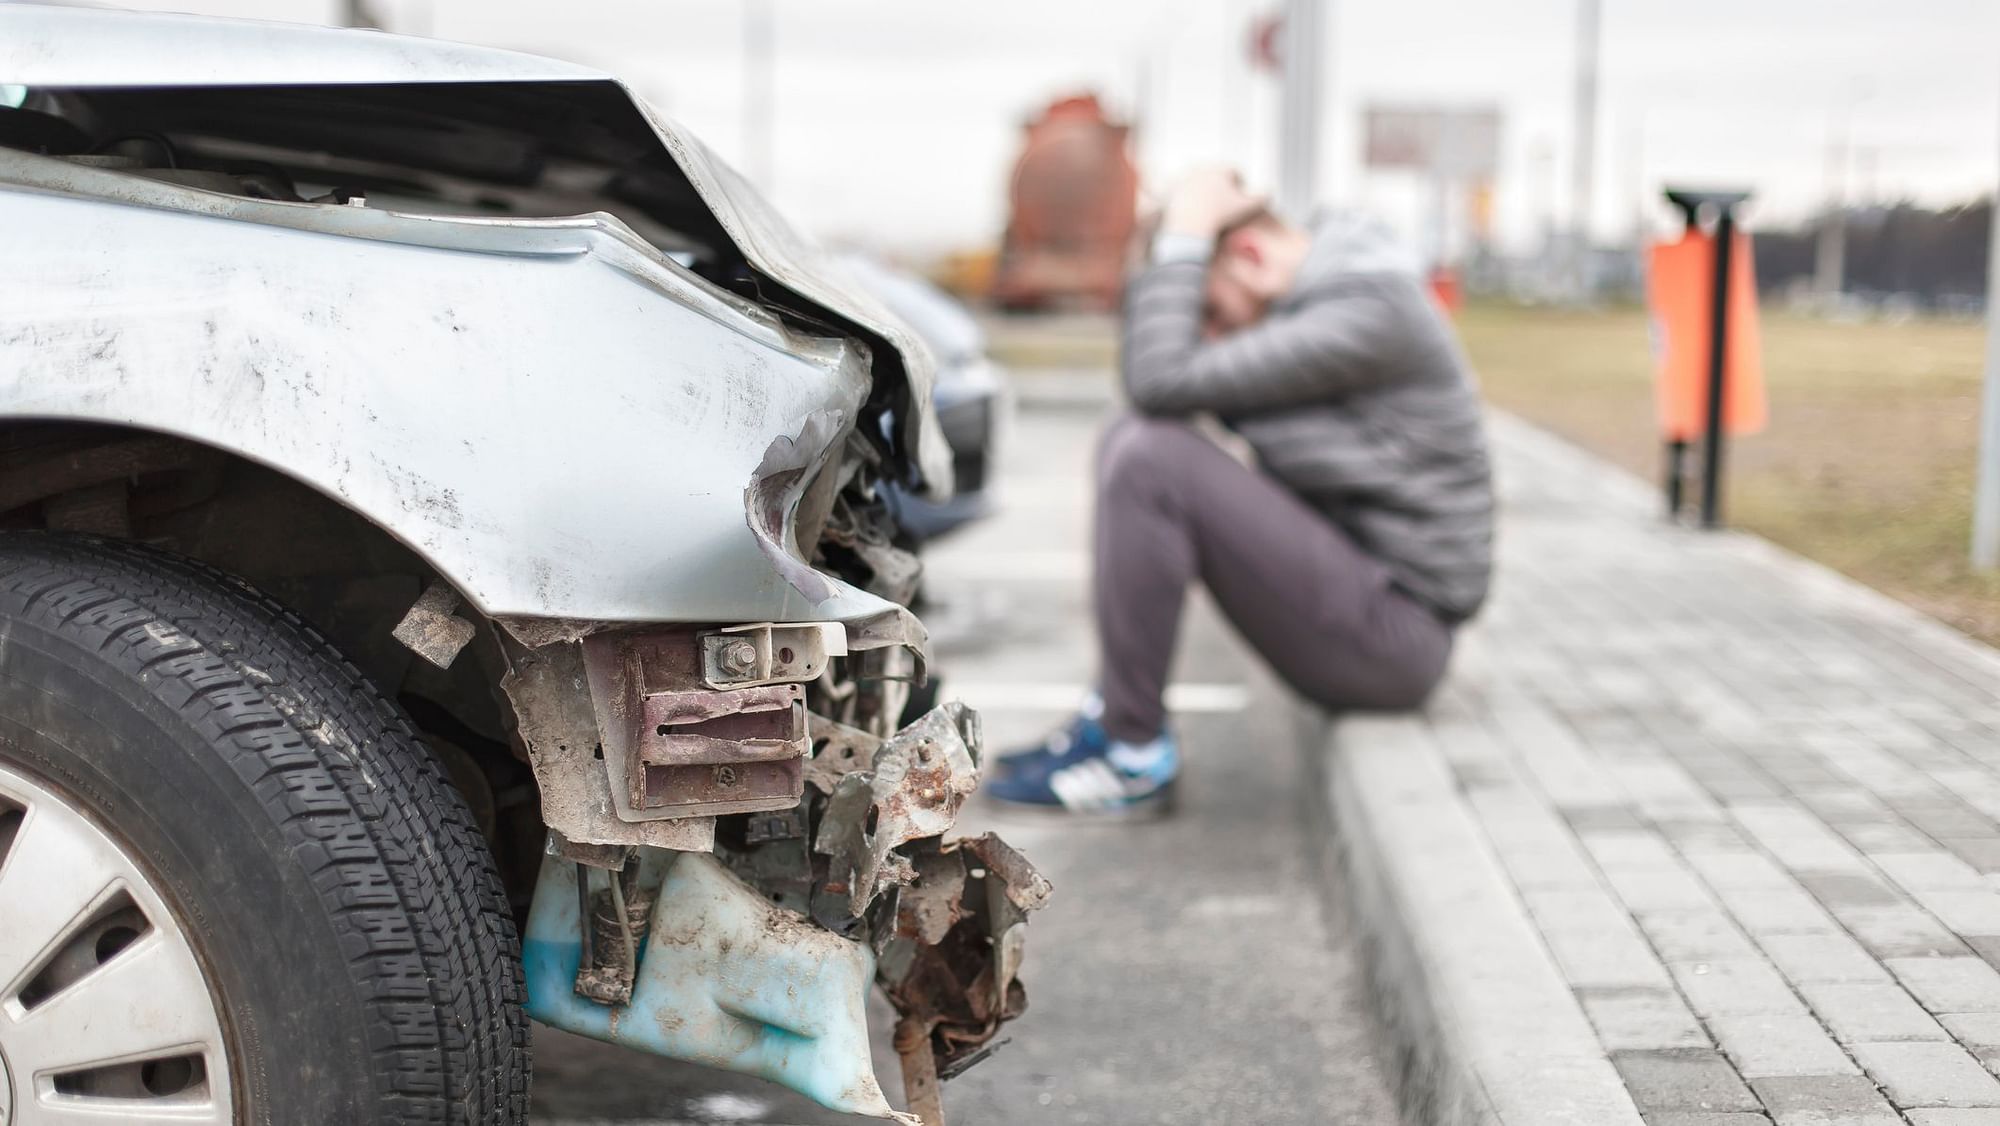 Drivers with ADHD also experienced higher rates of specific crash types, says a new study.